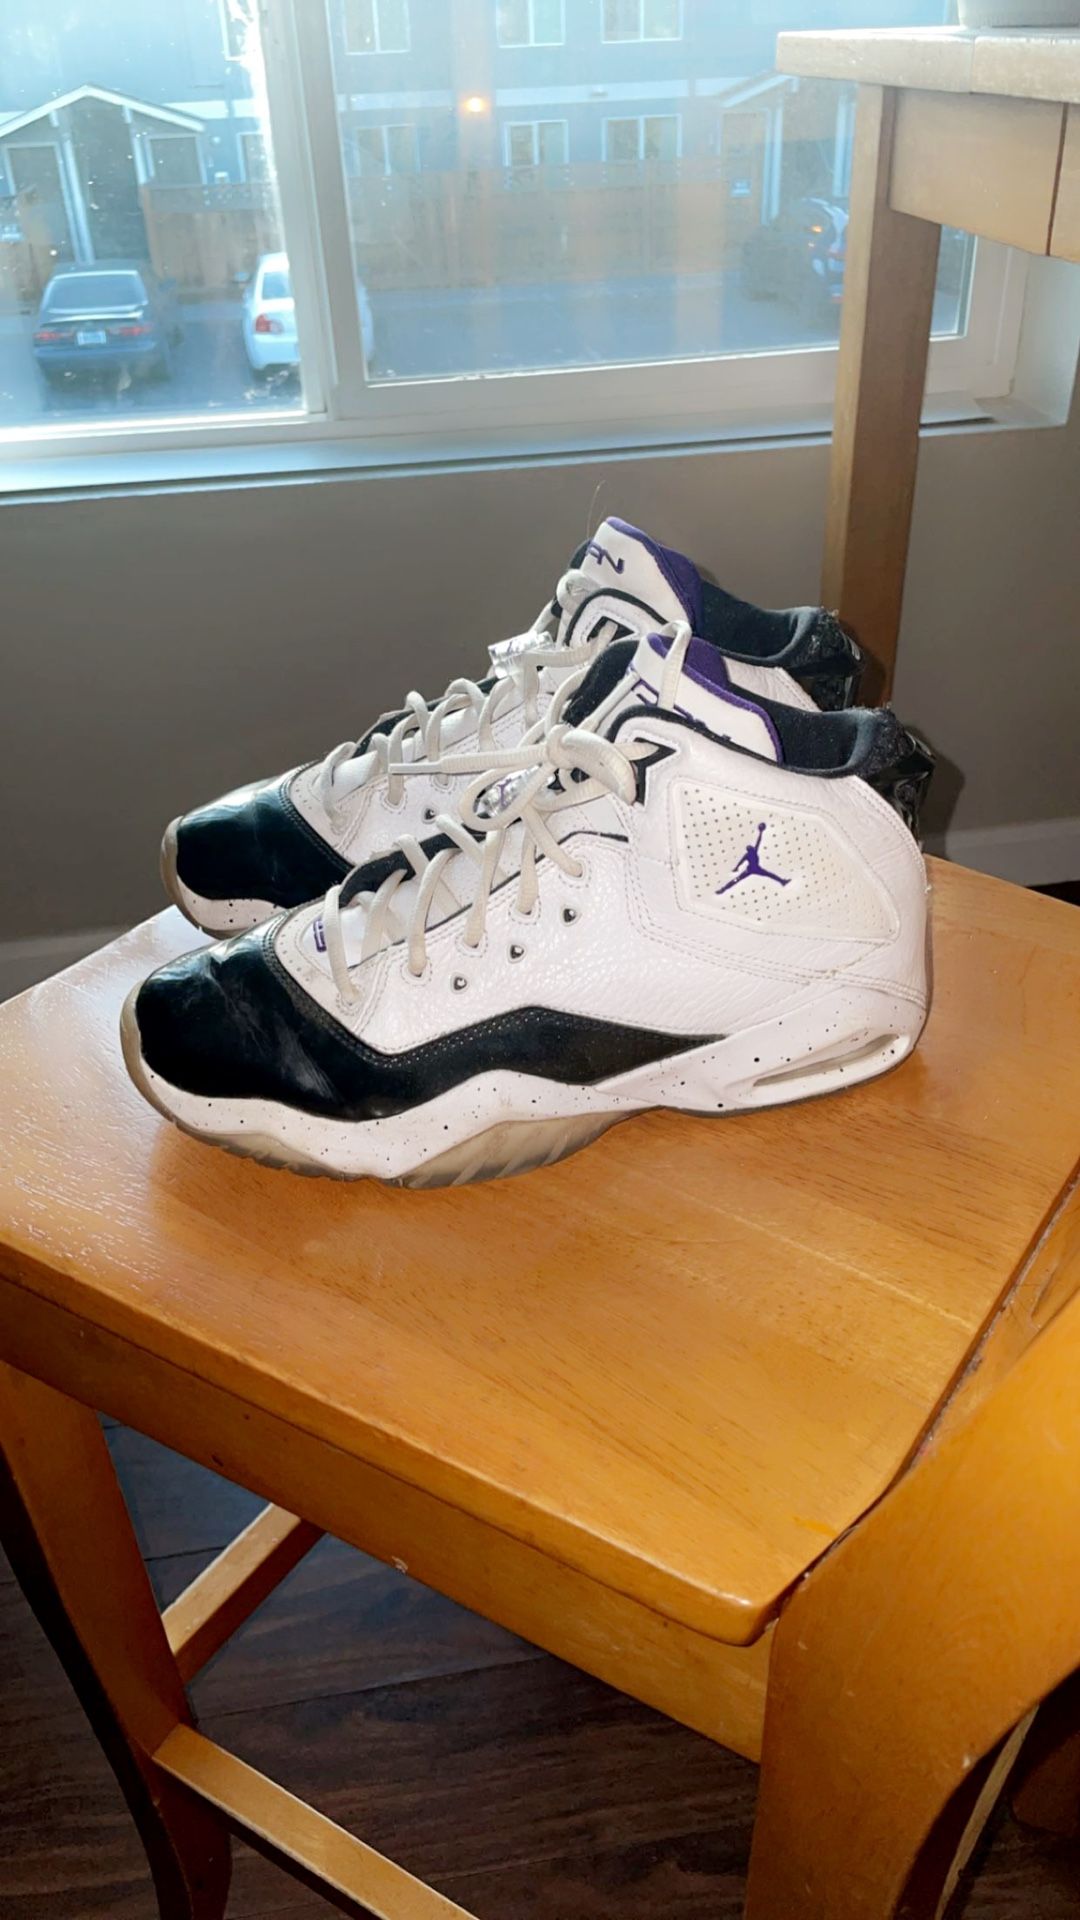 B’Loyal ‘White Court Purple’ Sneakers (Box not included)